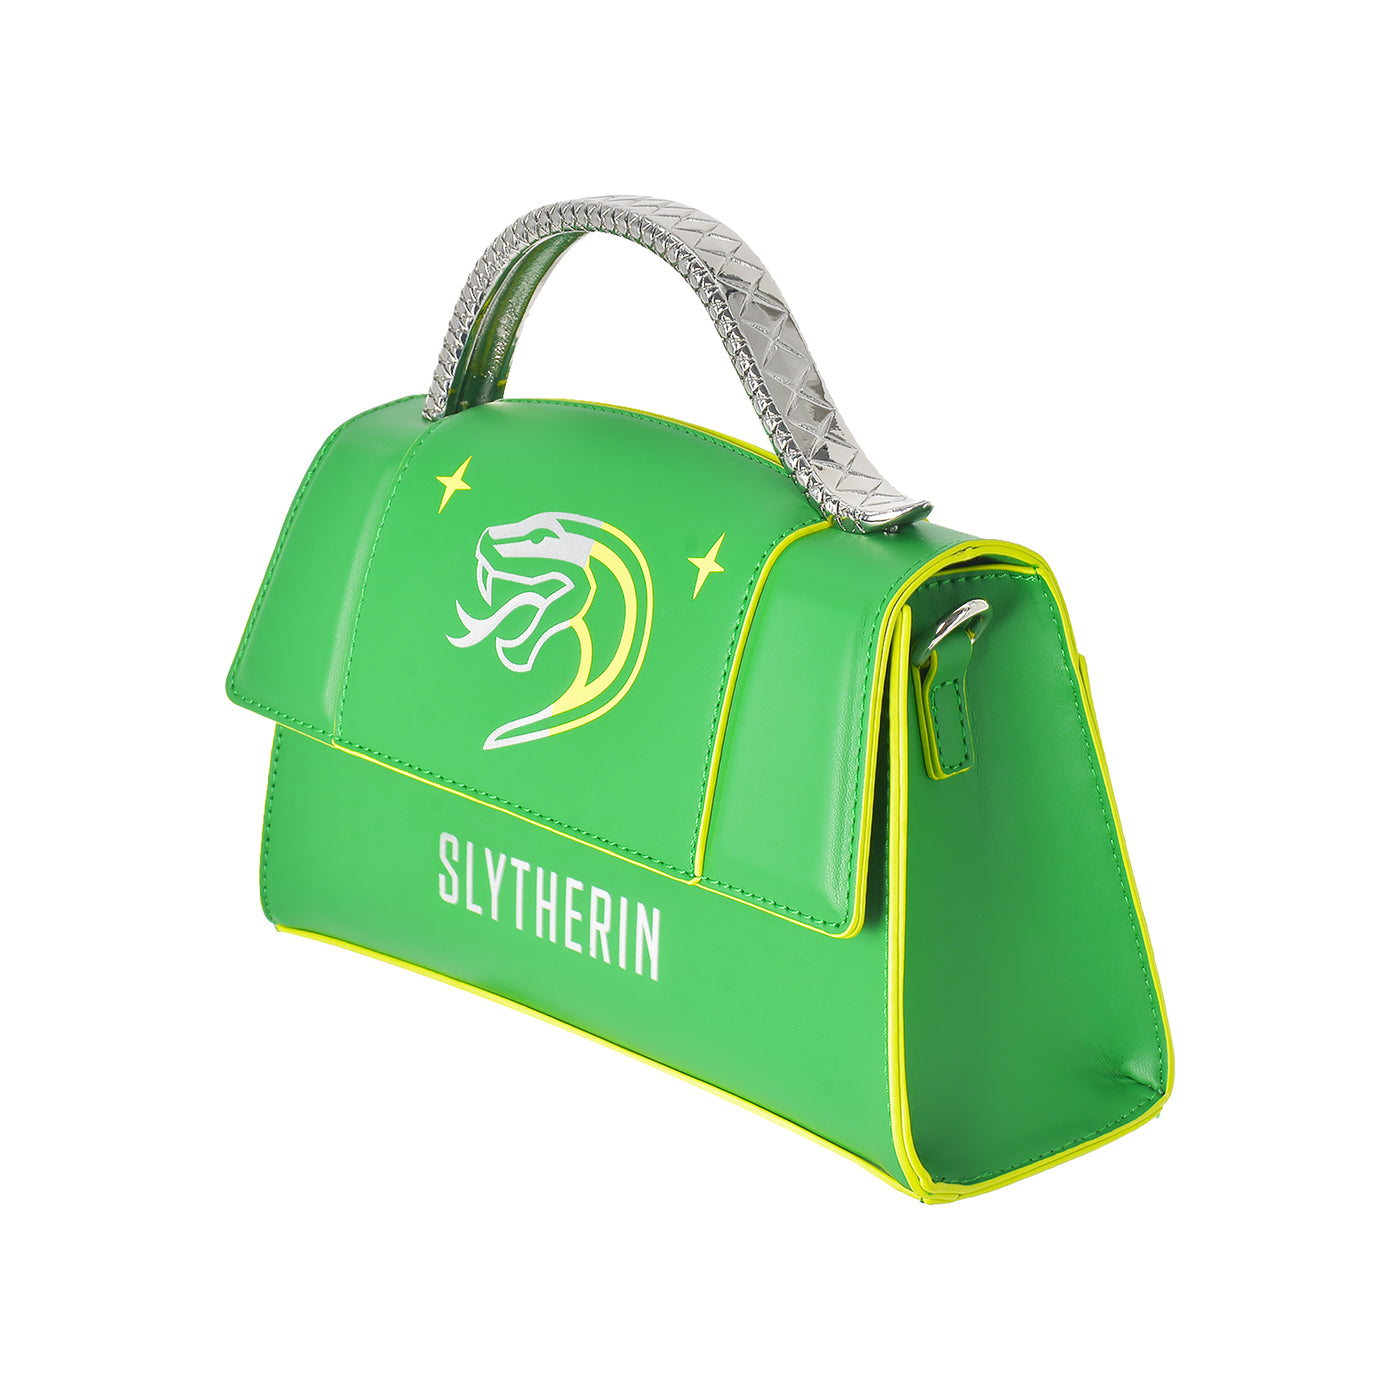 Fred Segal Harry Potter Slytherin Mascot Flap Satchel - Side View